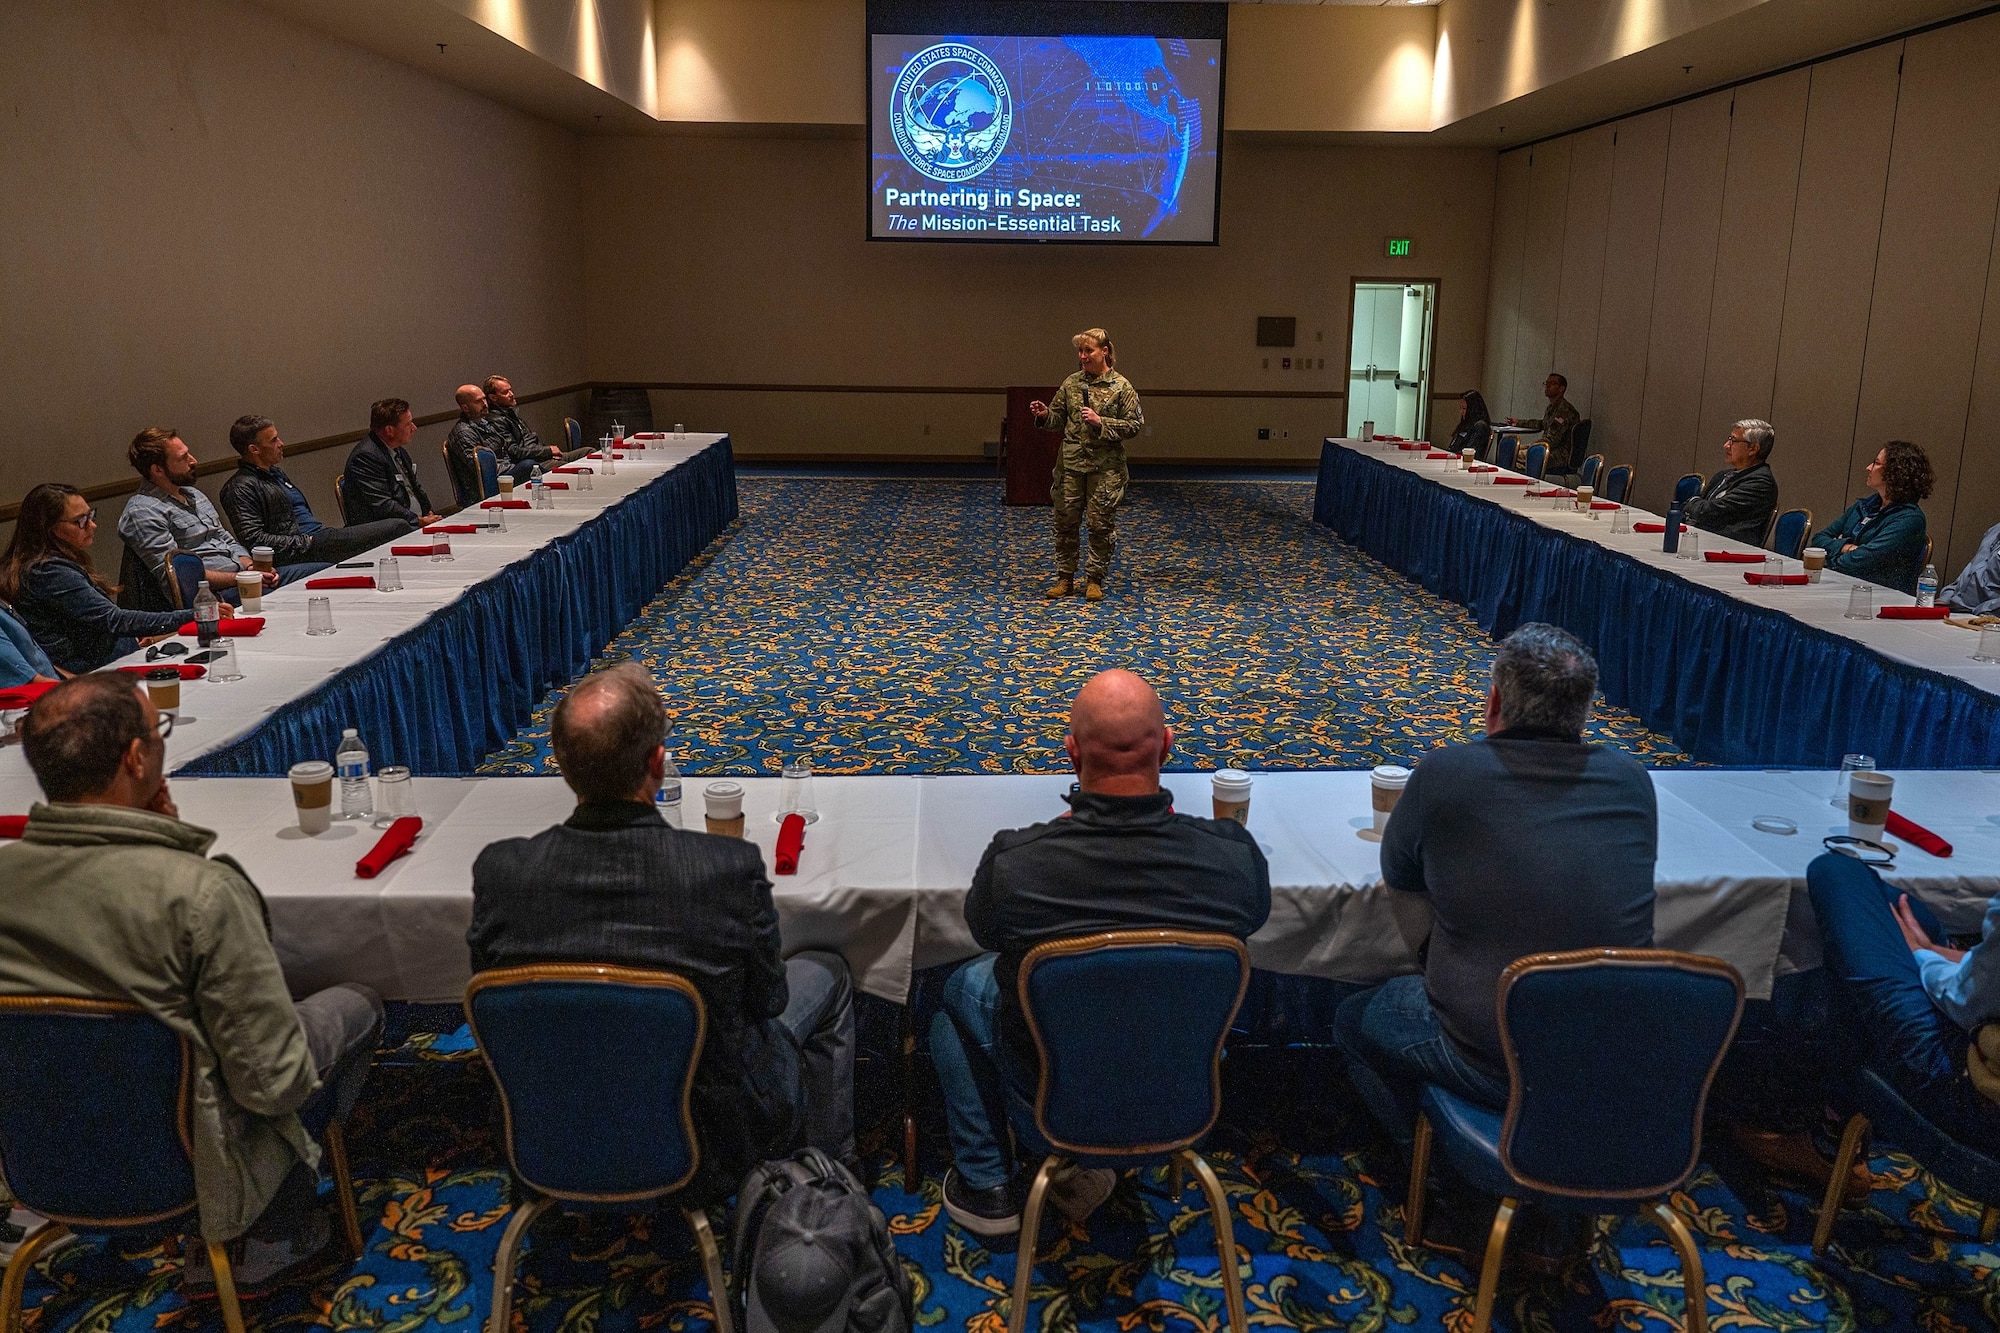 U.S. Space Force Maj. Gen. DeAnna Burt, Combined Force Space Component Command (CFSCC) commander and U.S. Space Operations Command deputy commander, speaks to members of the Santa Barbara Young Presidents Organization during their base immersion at Vandenberg Space Force Base, Calif., May 19, 2022. Burt spoke about the CFSCC's mission and how partnerships with commercial industry and other nations is needed for advancements in technology and capabilities to keep pace with our adversaries and provide security of our nation's space assets. (U.S. Space Force photo by Tech. Sgt. Luke Kitterman)